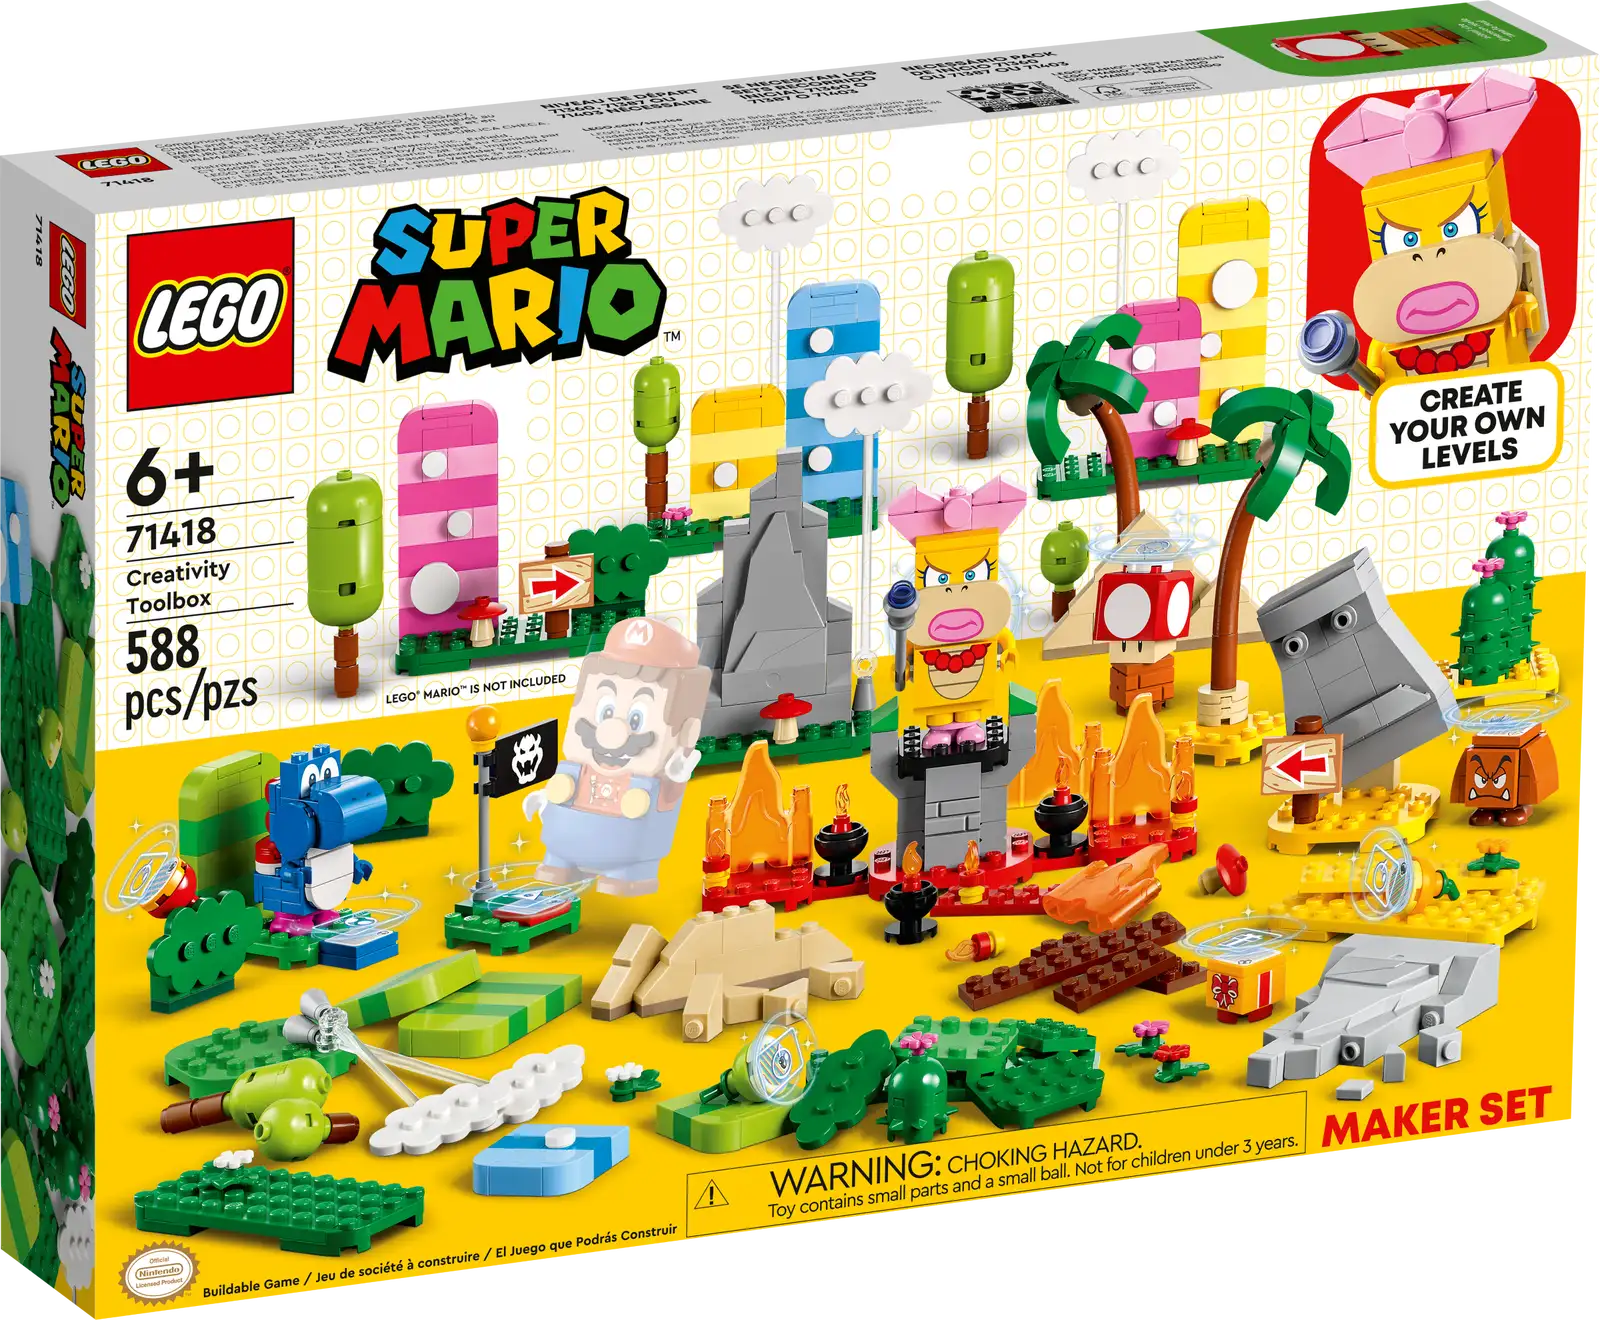 Young builders can add extra detail and depth to their LEGO® Super Mario™ levels with this Creativity Toolbox Maker Set (71418). It features buildable trees, flowers, mountains, mushrooms, pyramids, a Checkpoint Flag and more to recreate the look of Super Mario™ grass, desert and lava levels. A great gift idea for kids aged 6 and up who own a Starter Course (71360, 71387 or 71403 – required for interactive play), it also includes 3 fruits, a gift box and a Super Mushroom with an Action Tag and 3 LEGO Super Mario characters: Wendy, a Blue Yoshi and a Goomba. Companion app Download the LEGO Super Mario app for building instructions, creative inspiration and other fun stuff to spark children’s imaginations. Collectible toy playsets Modular LEGO Super Mario Starter Courses and Expansion Sets allow fans unlimited ways to expand, rebuild and customize their own unique levels for hours of coin-collecting play. Colorful builds to add to LEGO® Super Mario™ levels – Give children the Creativity Toolbox Maker Set (71418) to add detail and depth to their LEGO Super Mario Starter Course and Expansion Sets 3 LEGO® Super Mario™ figures – The set includes Wendy, a Blue Yoshi and a Goomba Classic grass, desert and lava builds – The set includes buildable trees, flowers, hills, mushrooms, pyramids, signs and a Checkpoint Flag, plus cloud and bush elements 3 fruits, a gift box and a Super Mushroom with an Action Tag – Includes a red, yellow and green fruit for LEGO® Mario™, LEGO® Luigi™ or LEGO® Peach™ (figures not included) to ‘eat’ For play or display – Kids can use the bricks in this toy playset to create displays for their collectible LEGO® Super Mario™ characters or to enhance their levels Gift for ages 6 and up – This 588-piece set makes a fun birthday or holiday gift for kids who own a LEGO® Super Mario™ Starter Course (71360, 71387 or 71403), which is required for interactive play Digital instructions – Download the companion LEGO® Super Mario™ app for building instructions, inspiring ideas and more. For a list of compatible Android and iOS devices, visit LEGO.com/devicecheck Inspire kids’ imaginations – Collectible LEGO® Super Mario™ toys are designed for solo or social play, offering coin-collecting fun and unlimited creative challenges through expansion and rebuilding Quality assurance – Since 1958, LEGO® components have complied with demanding industry quality standards to ensure that they connect consistently and securely for robust builds Safety first – LEGO® building bricks are tested in almost every way imaginable to make sure that they comply with strict global safety standards